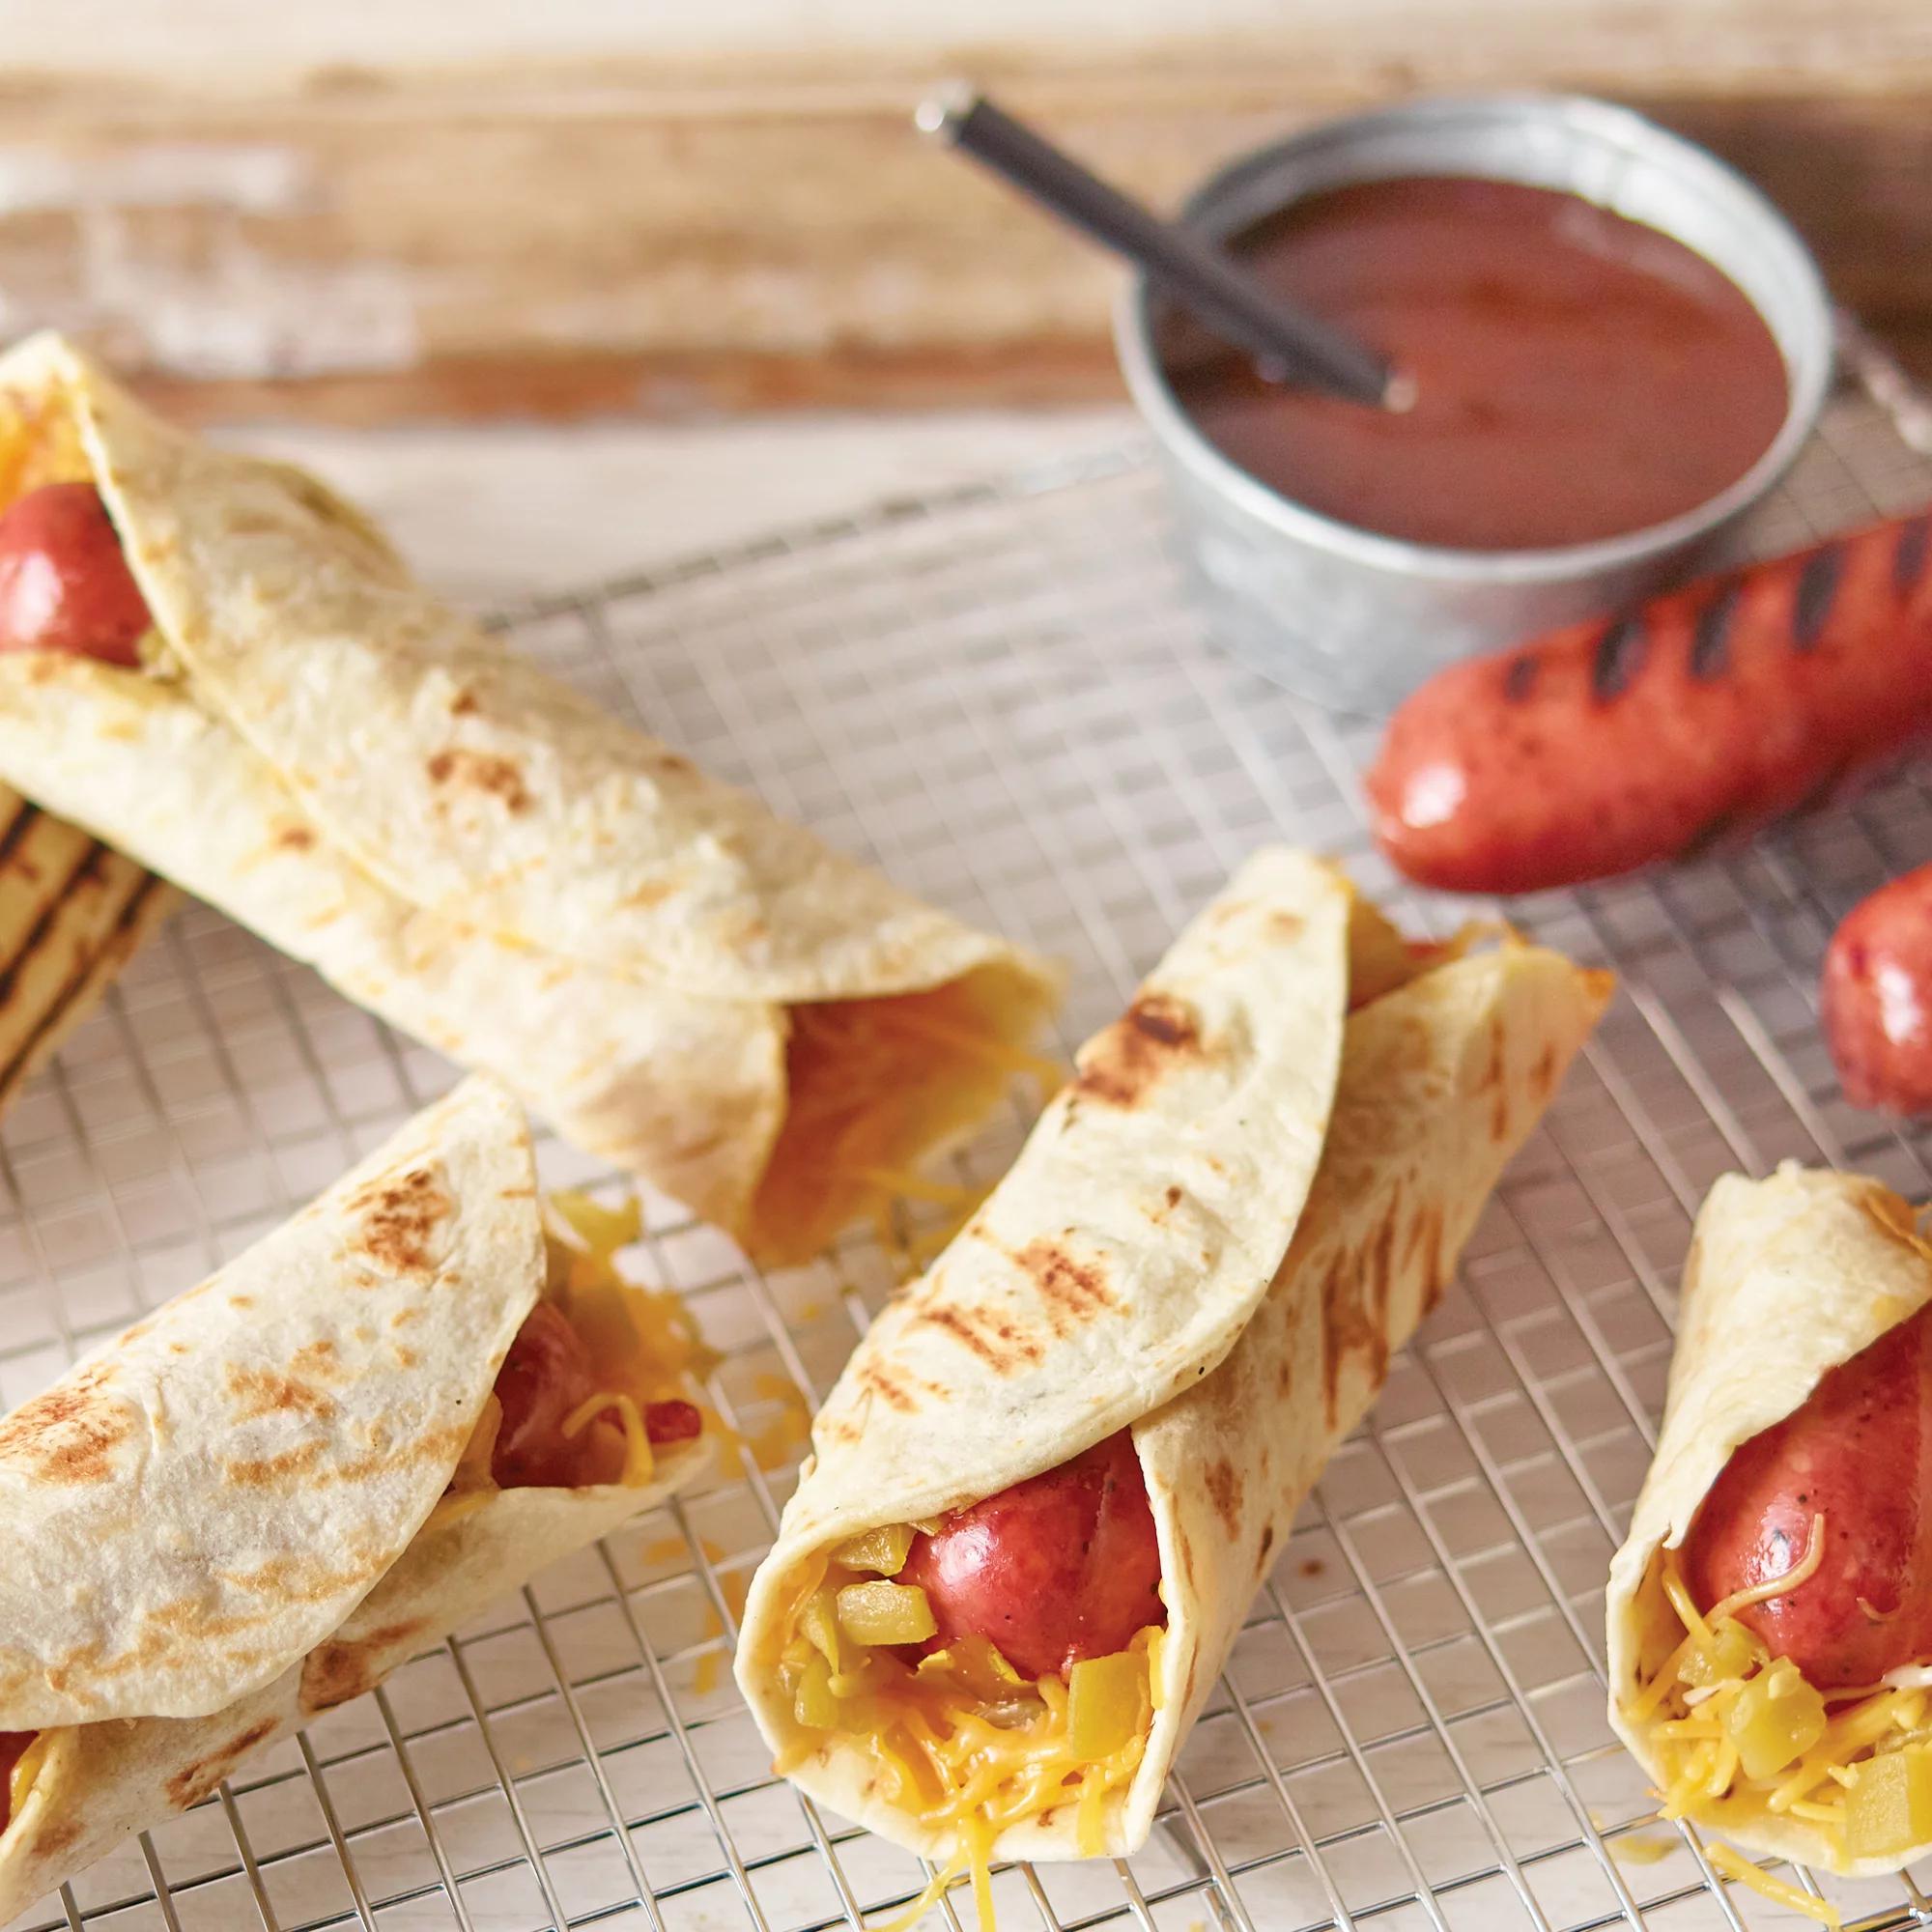 smoked sausage wraps - How many calories in a sausage wrap